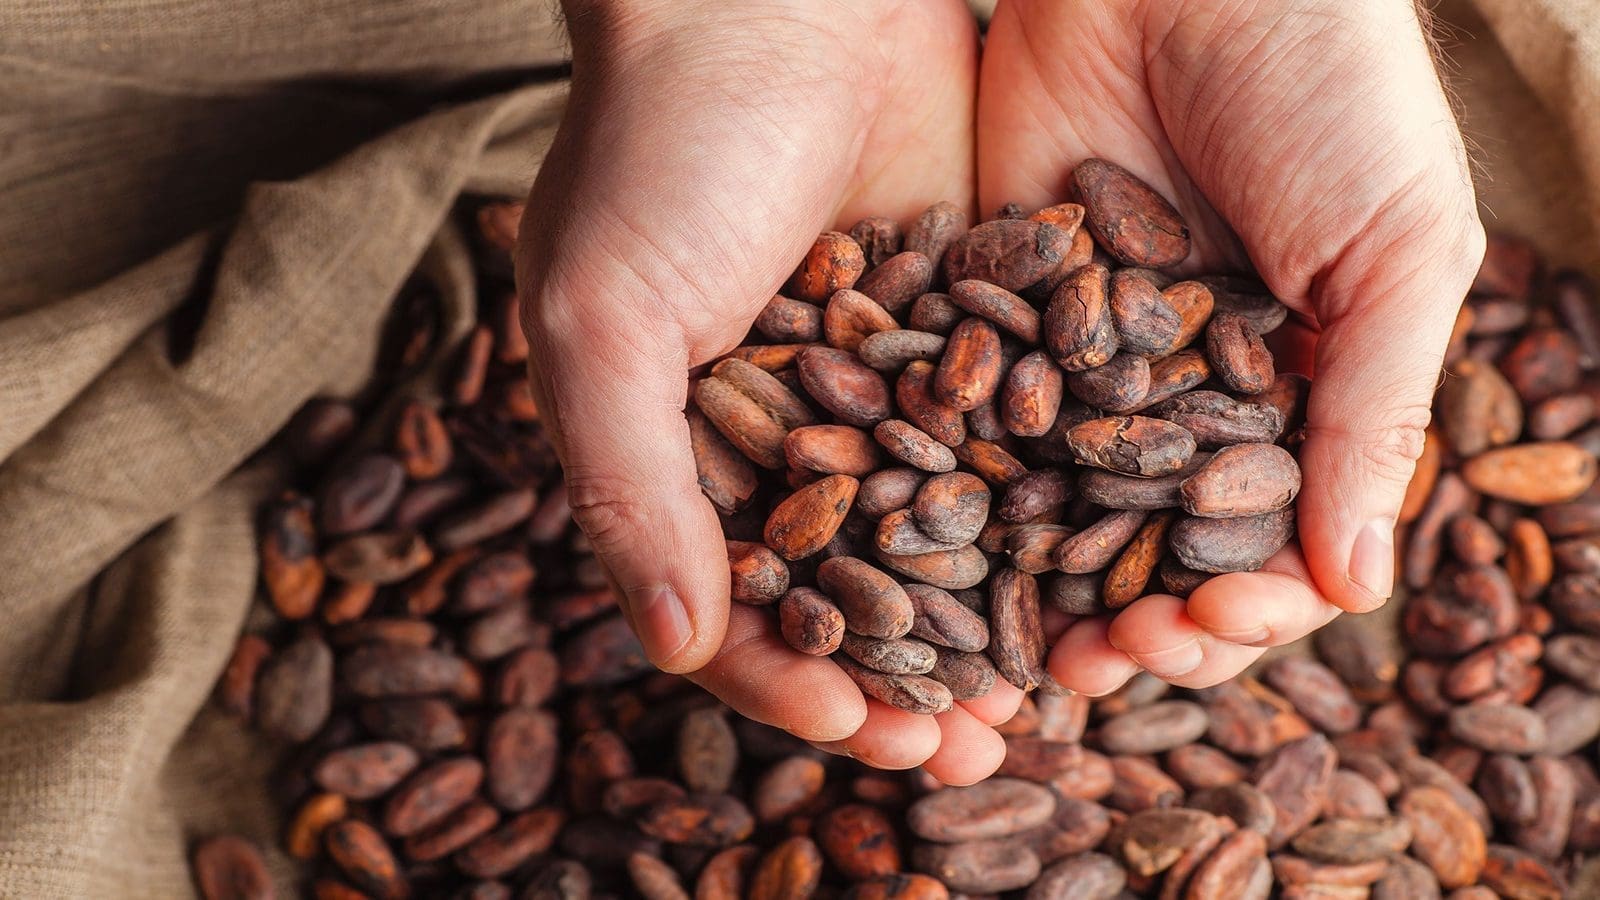 Leading cocoa producer Ivory Coast targets all its cocoa will be traceable by next season